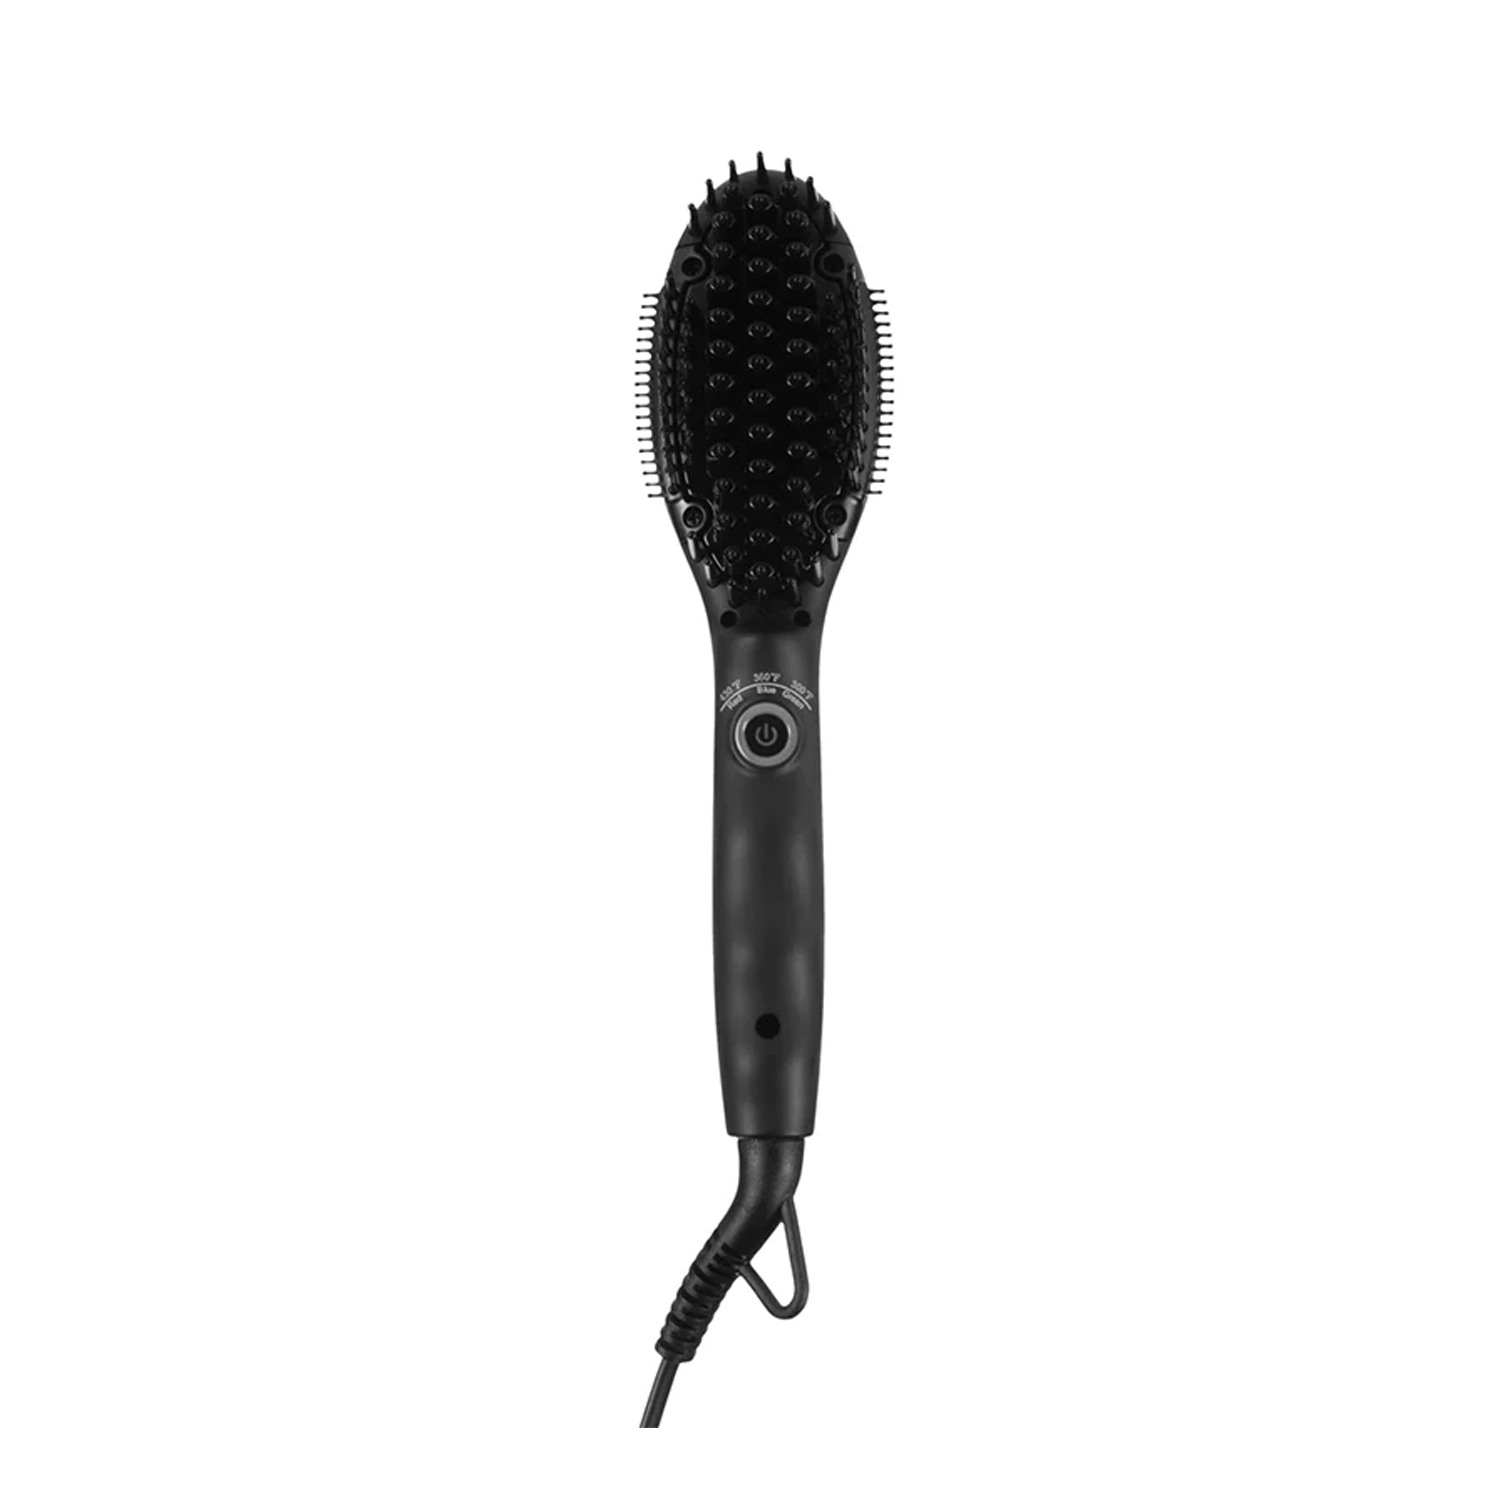 Sultra hair styling tool Long-lasting hairstyles